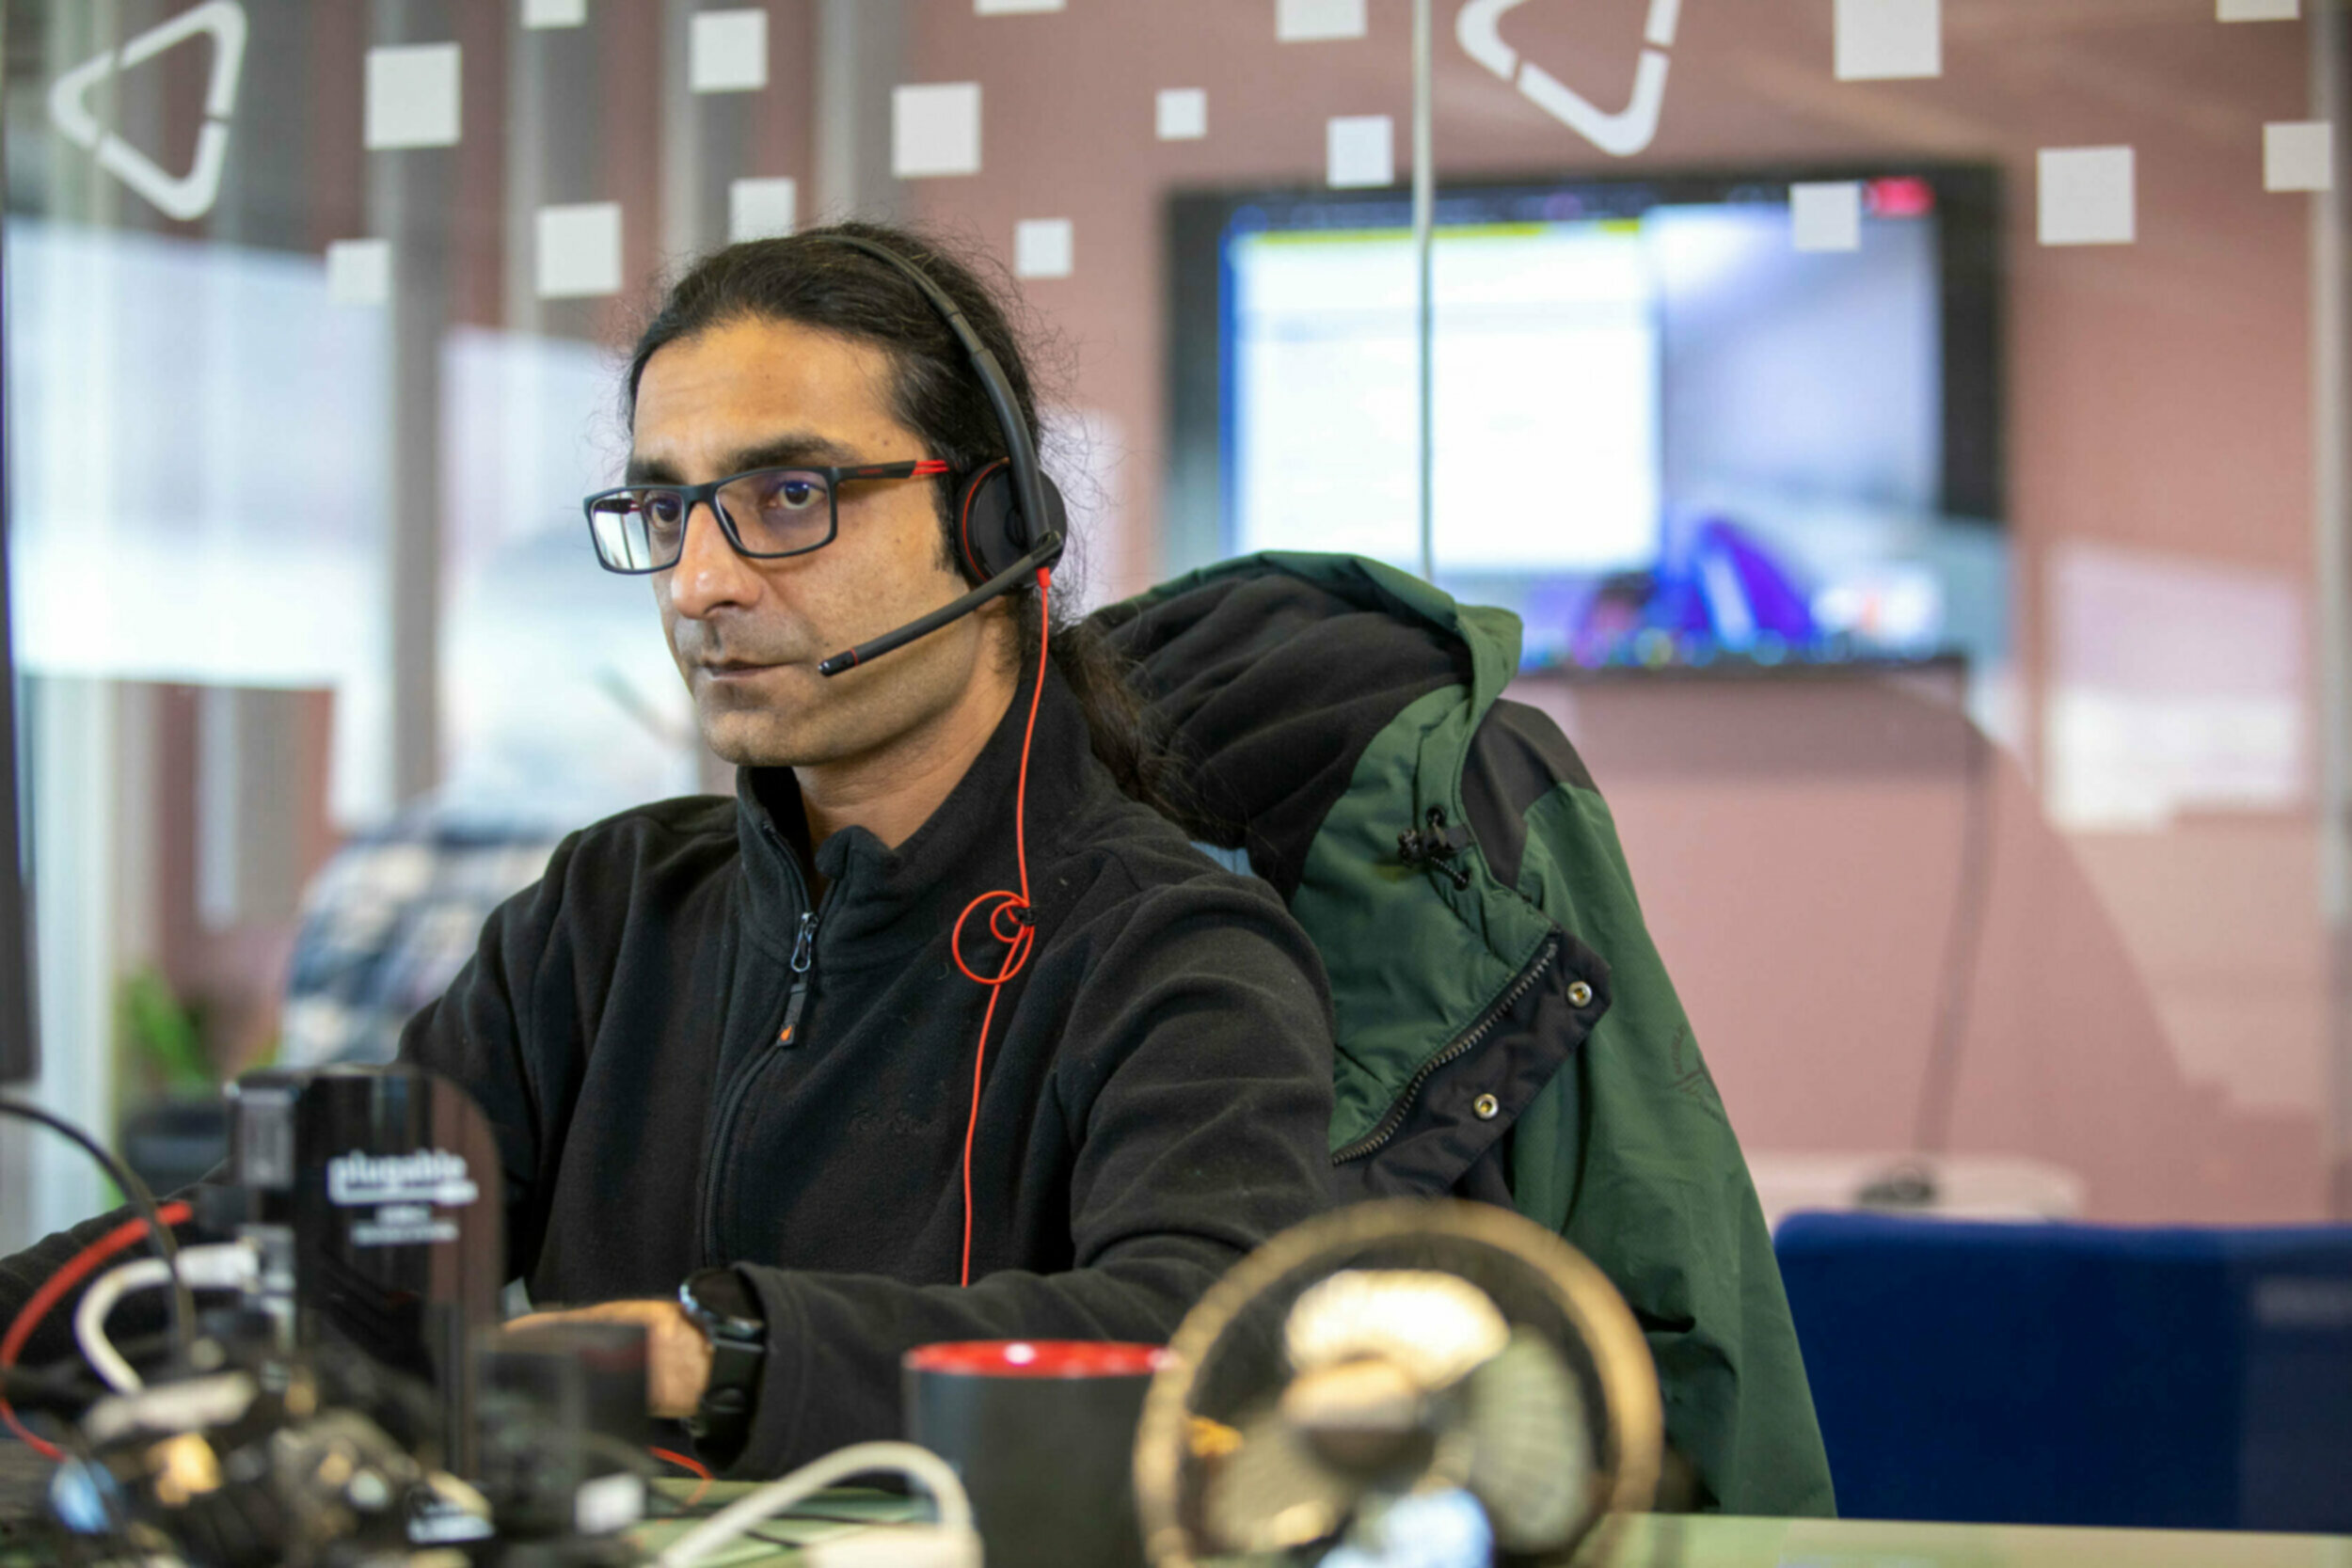 Man with headset at computer